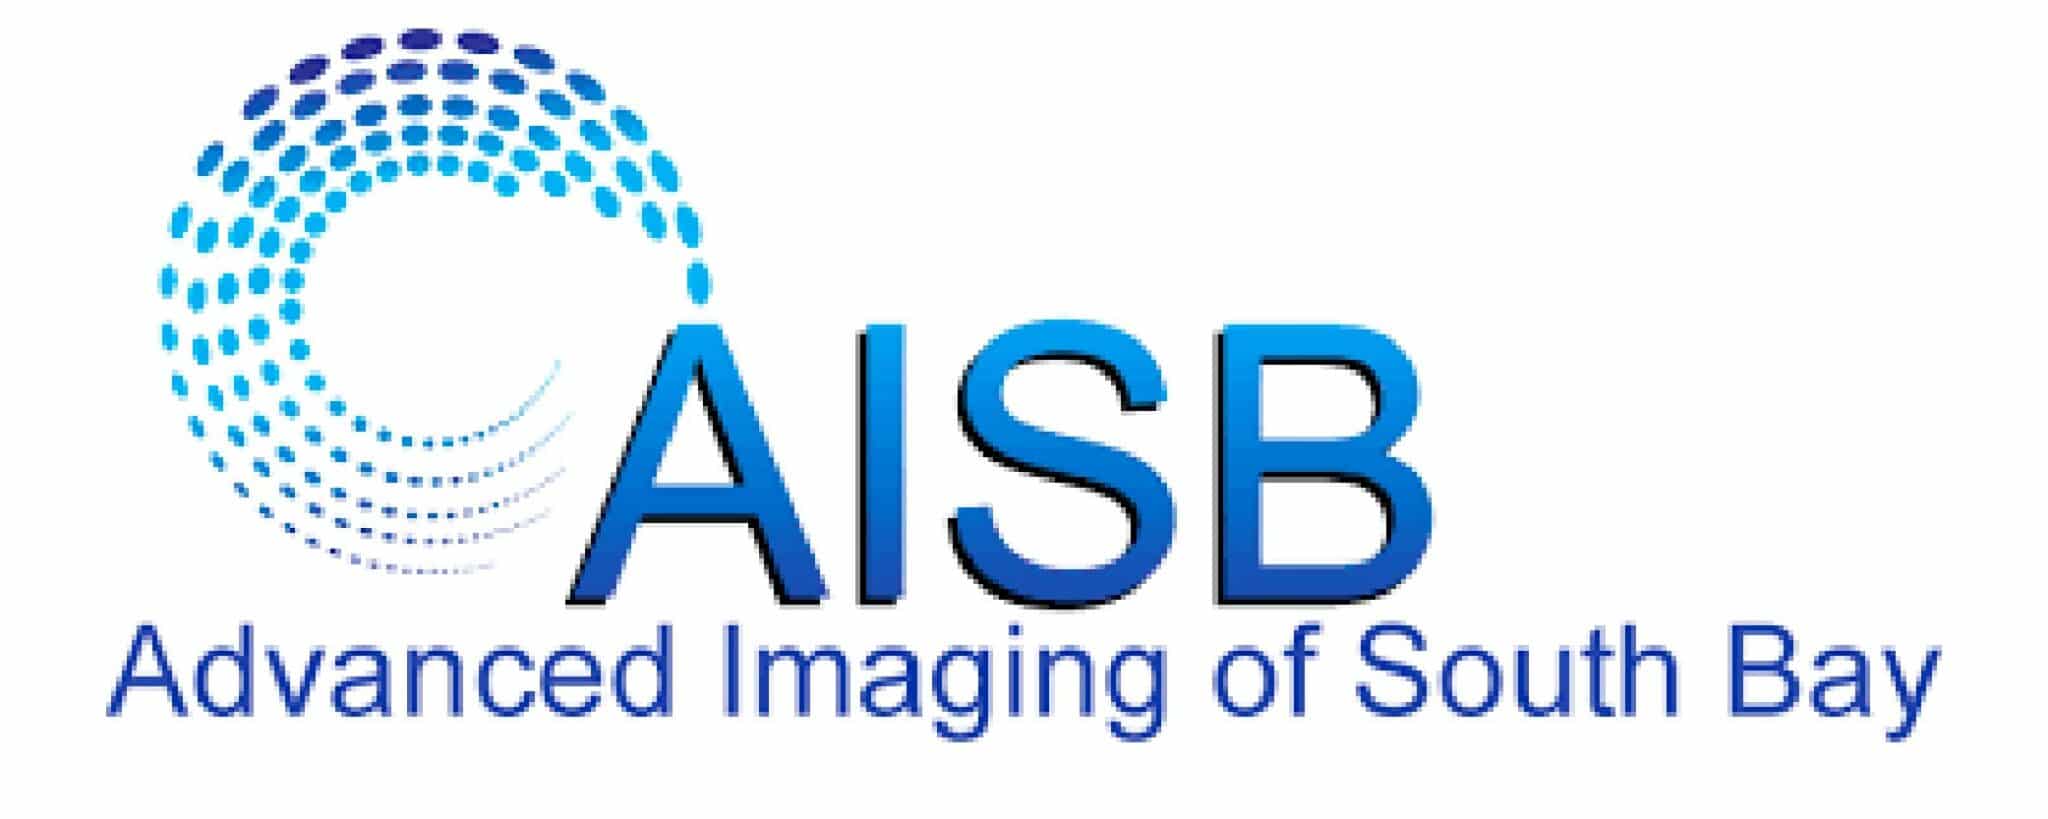 Advanced Imaging of South Bay